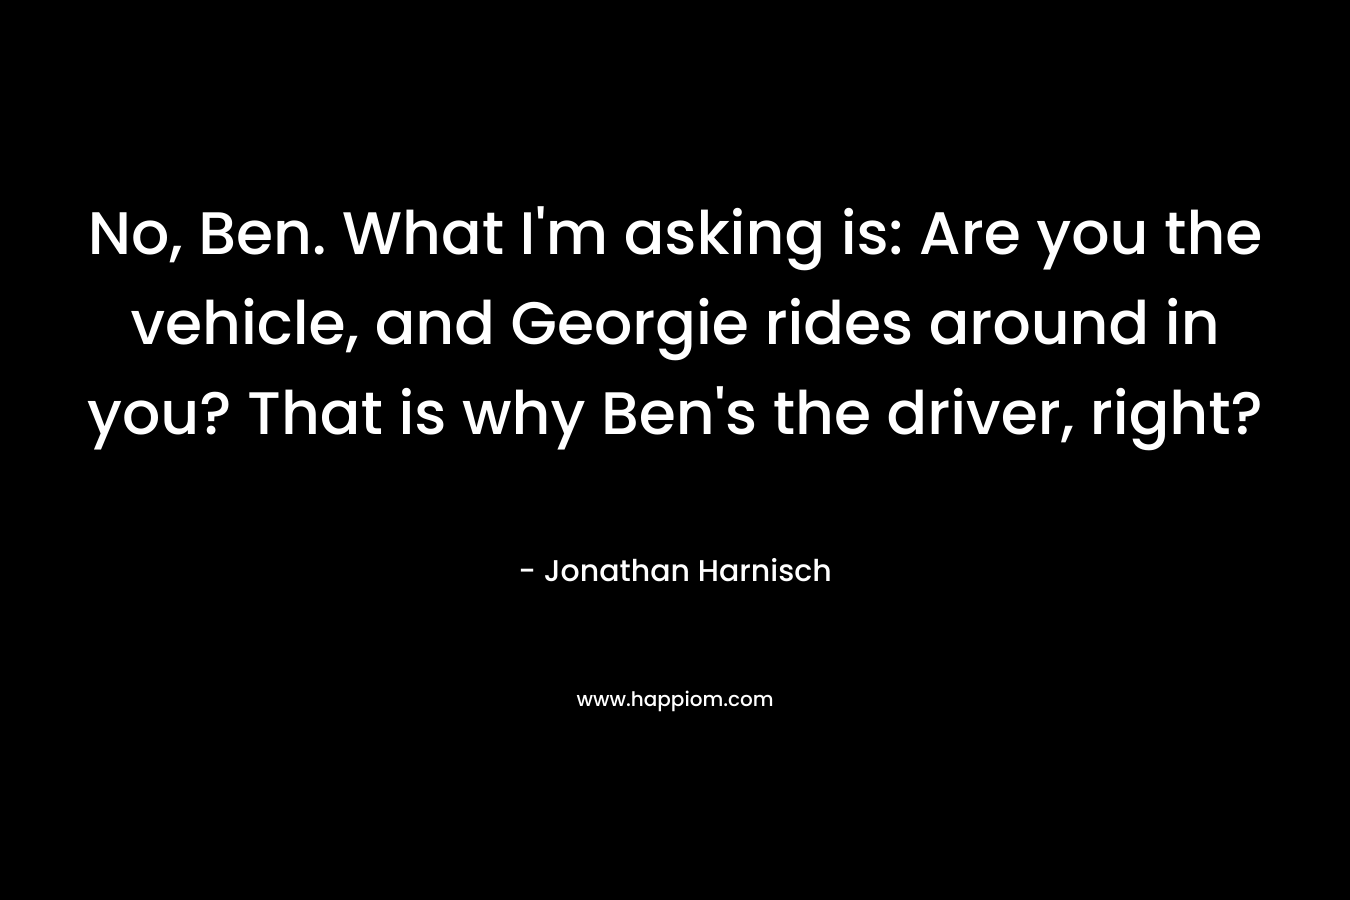 No, Ben. What I’m asking is: Are you the vehicle, and Georgie rides around in you? That is why Ben’s the driver, right? – Jonathan Harnisch